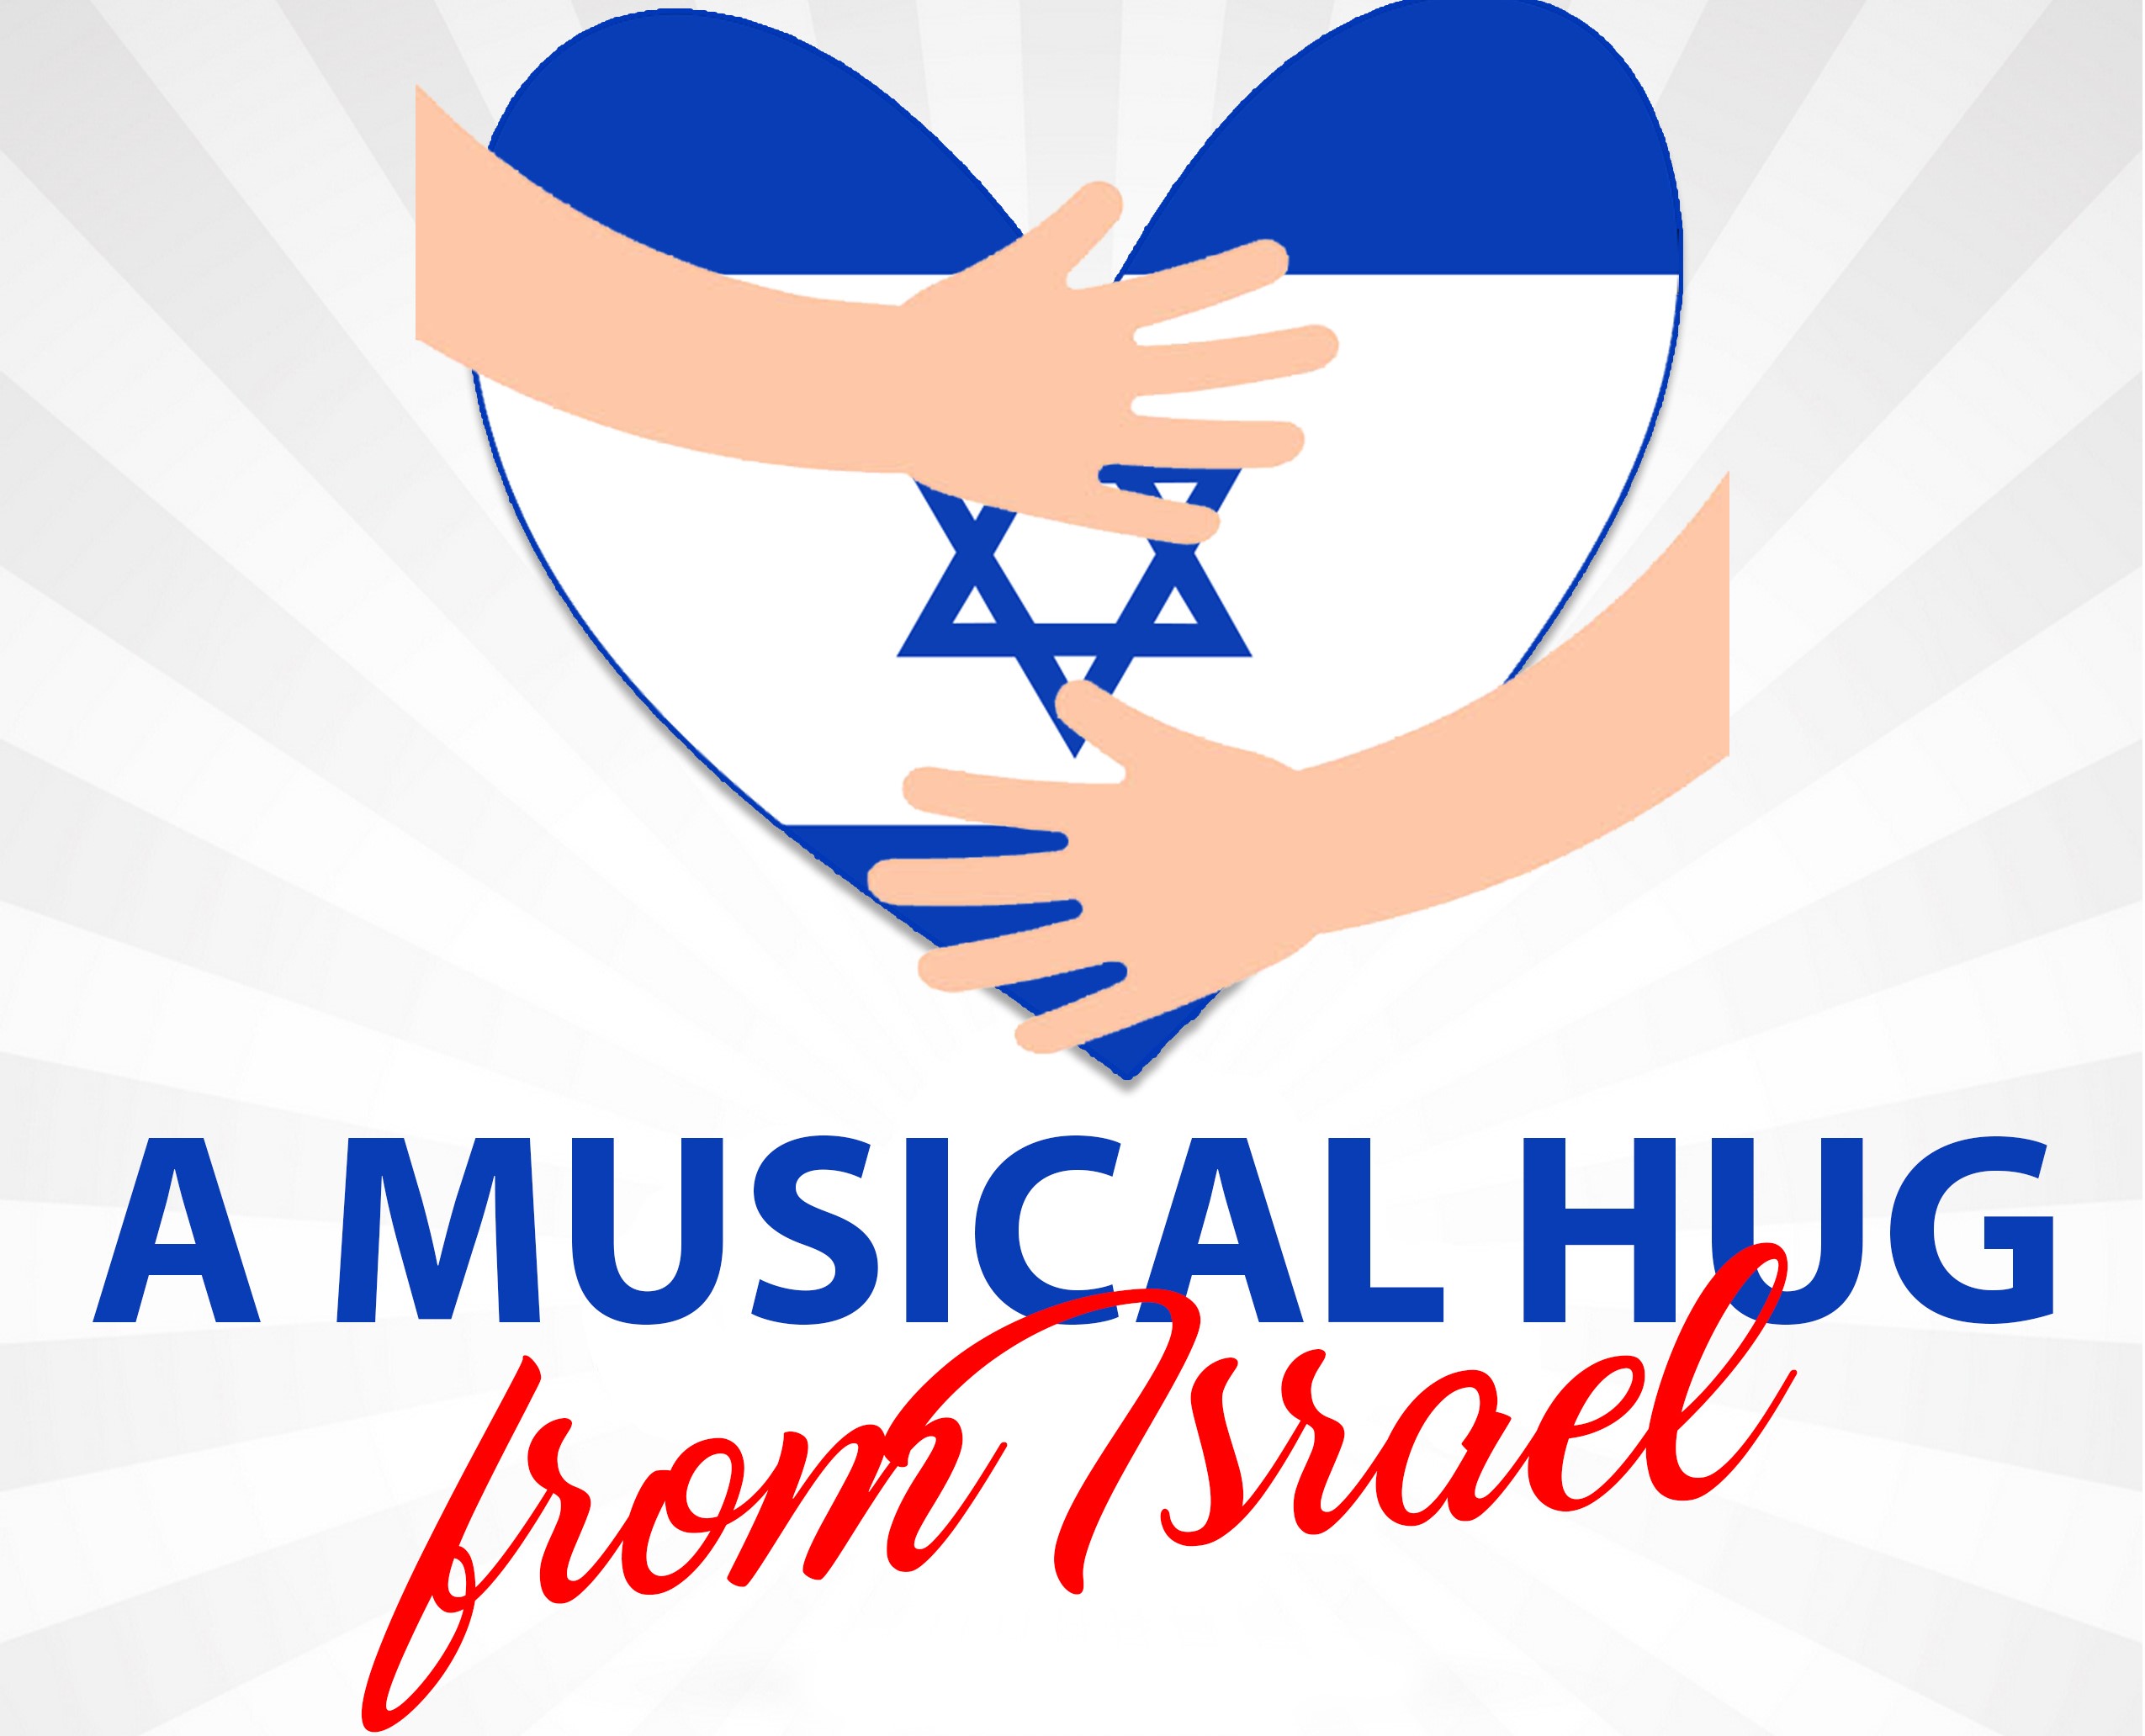 A Musical Hug from Israel